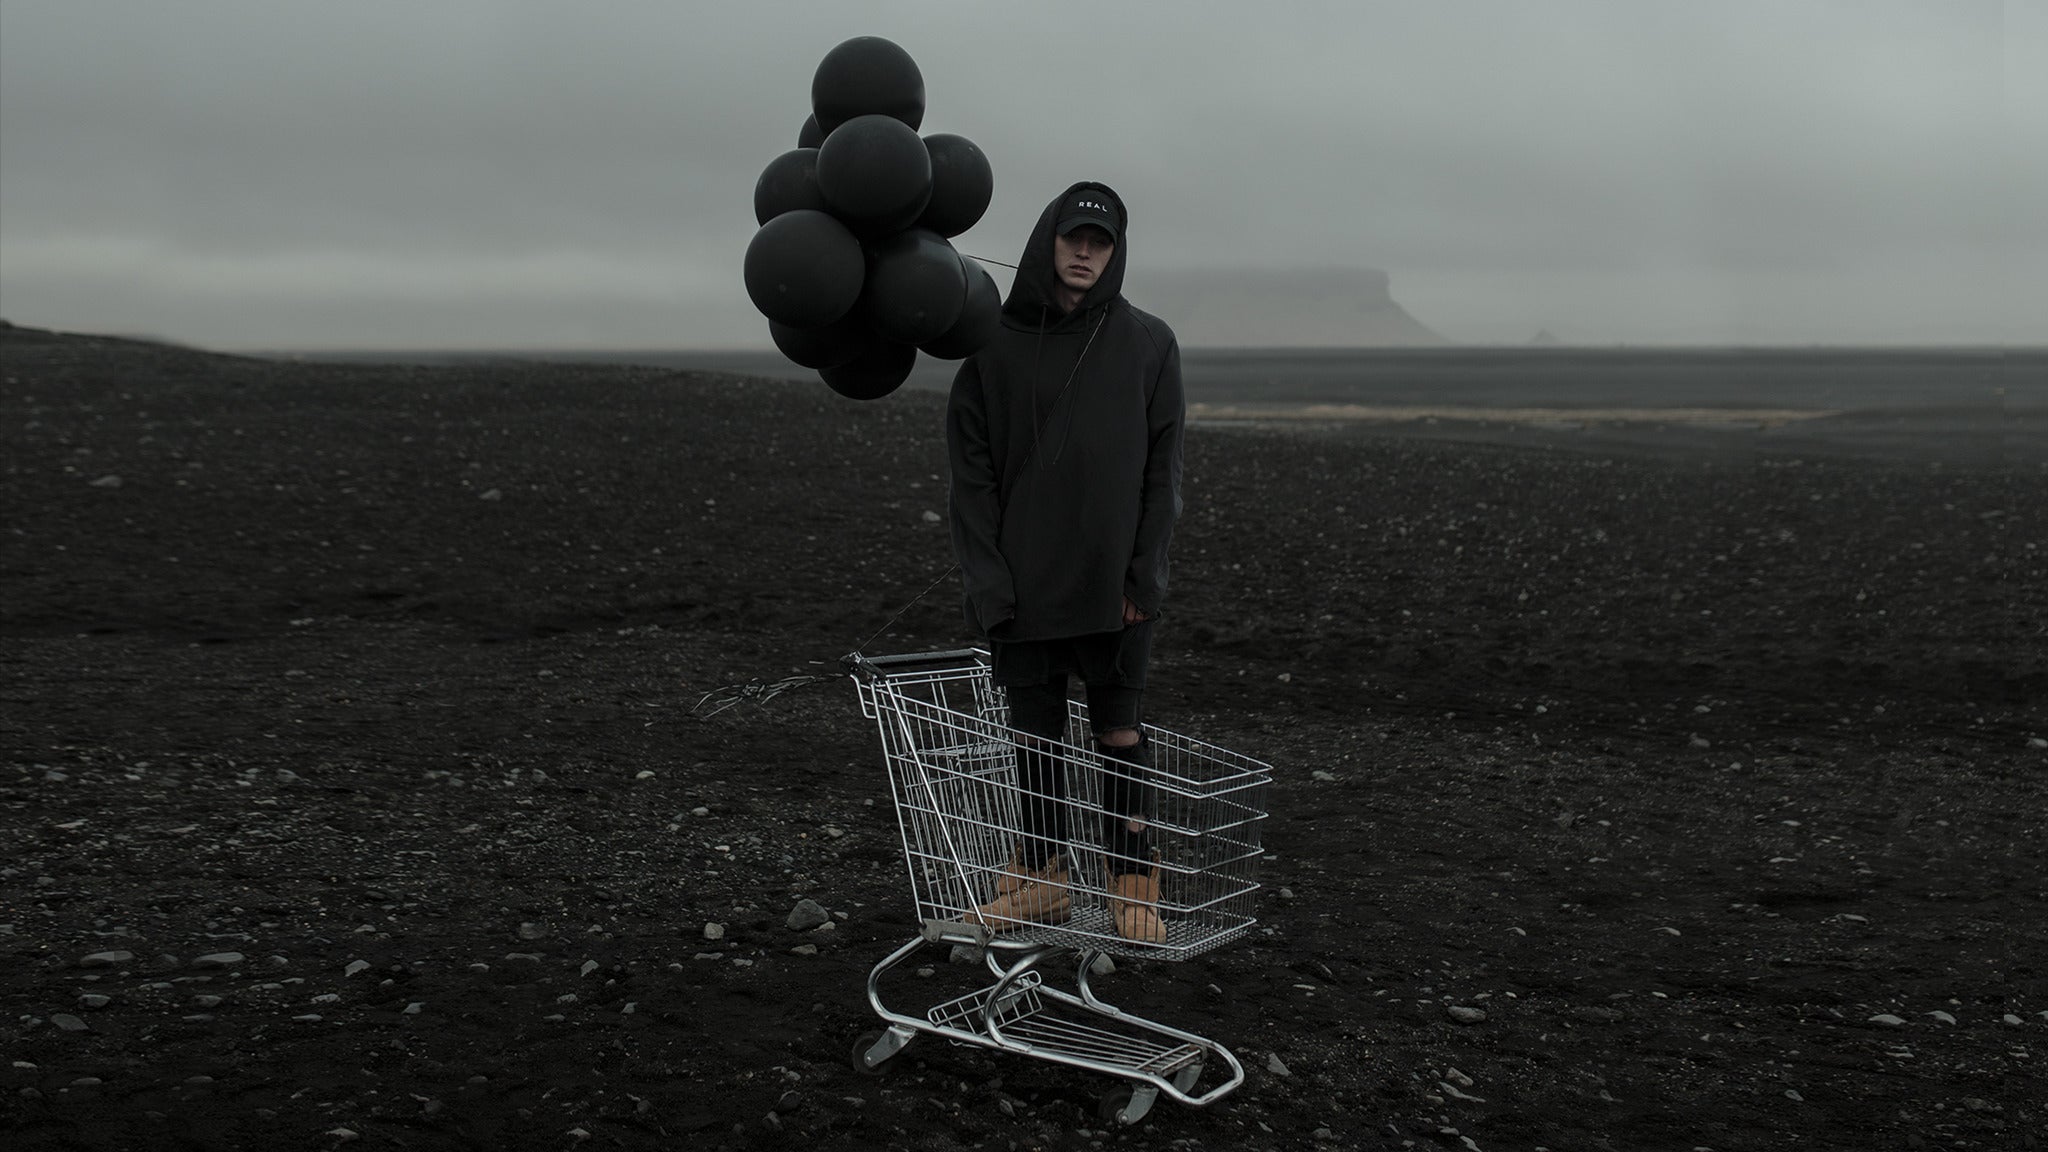 NF - The Search Tour in Baltimore promo photo for VIP Package presale offer code